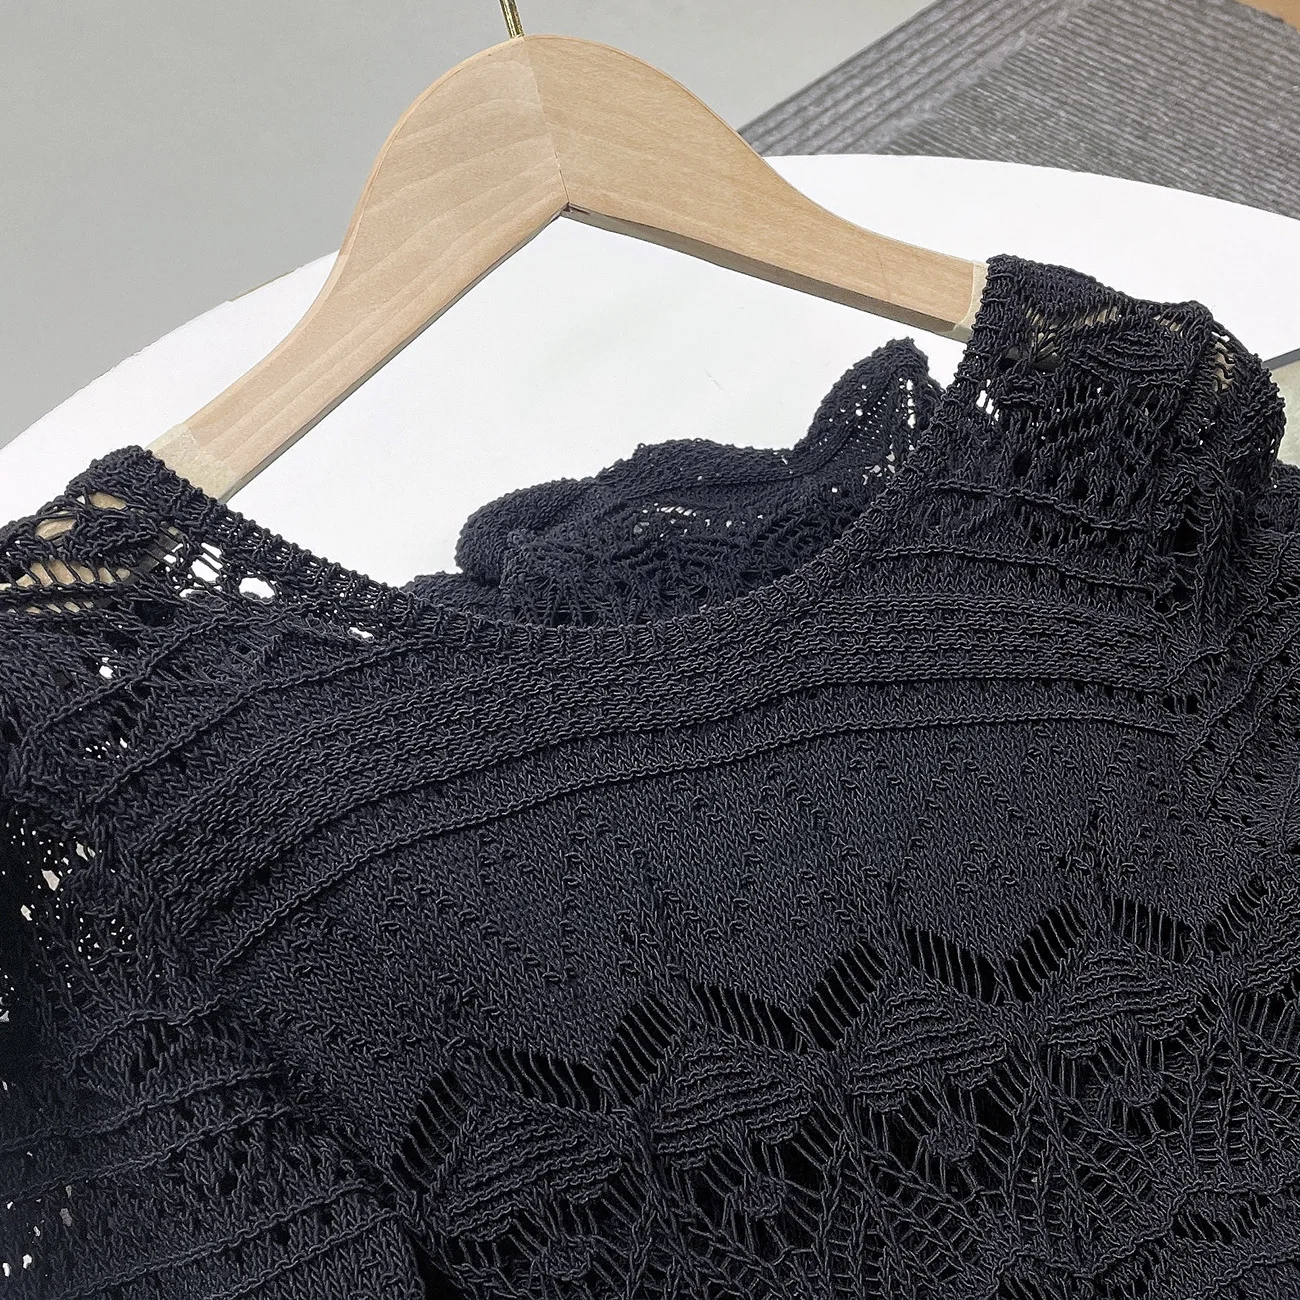 Women Elegant Black Openwork Knitted Dress Casual O-neck Long Sleeve Full Dresses Fashion Embroidery Lace Vestidos Lady Summer